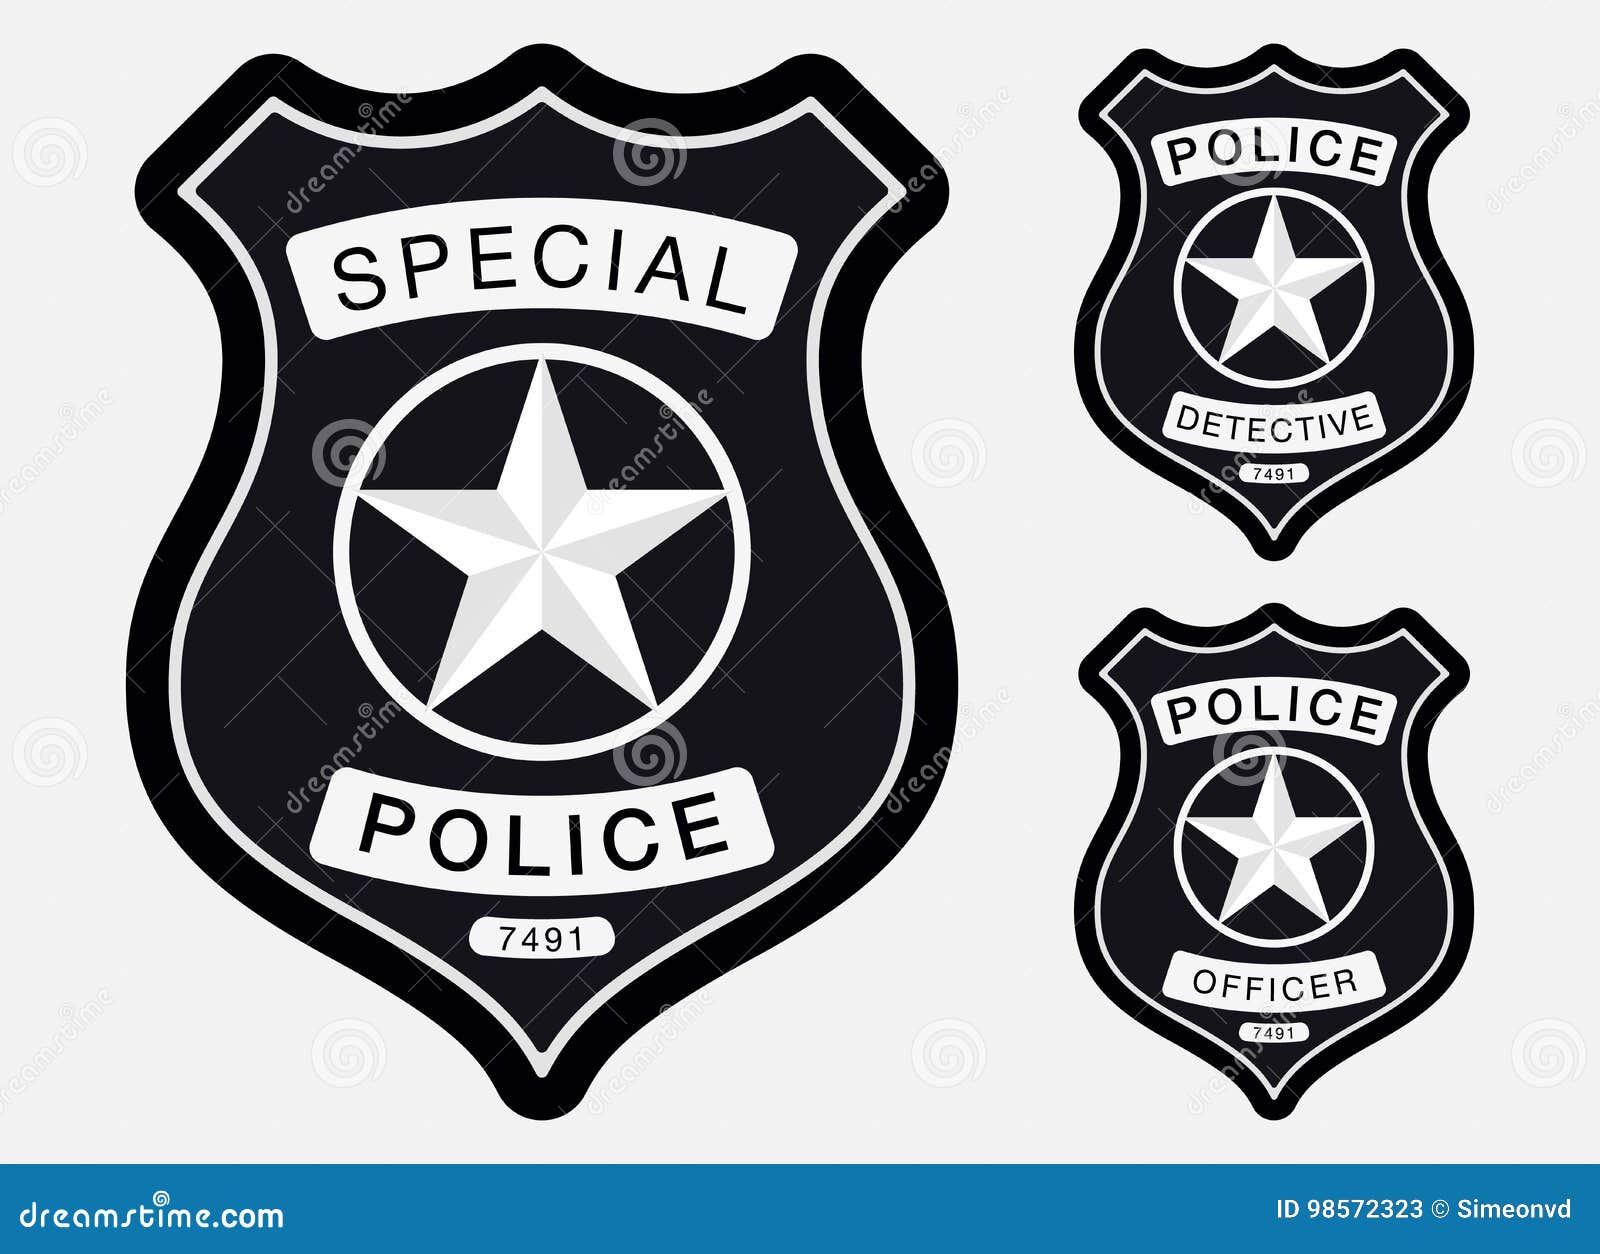 20 Drawing Of A Police Badge Template Illustrations RoyaltyFree Vector  Graphics  Clip Art  iStock